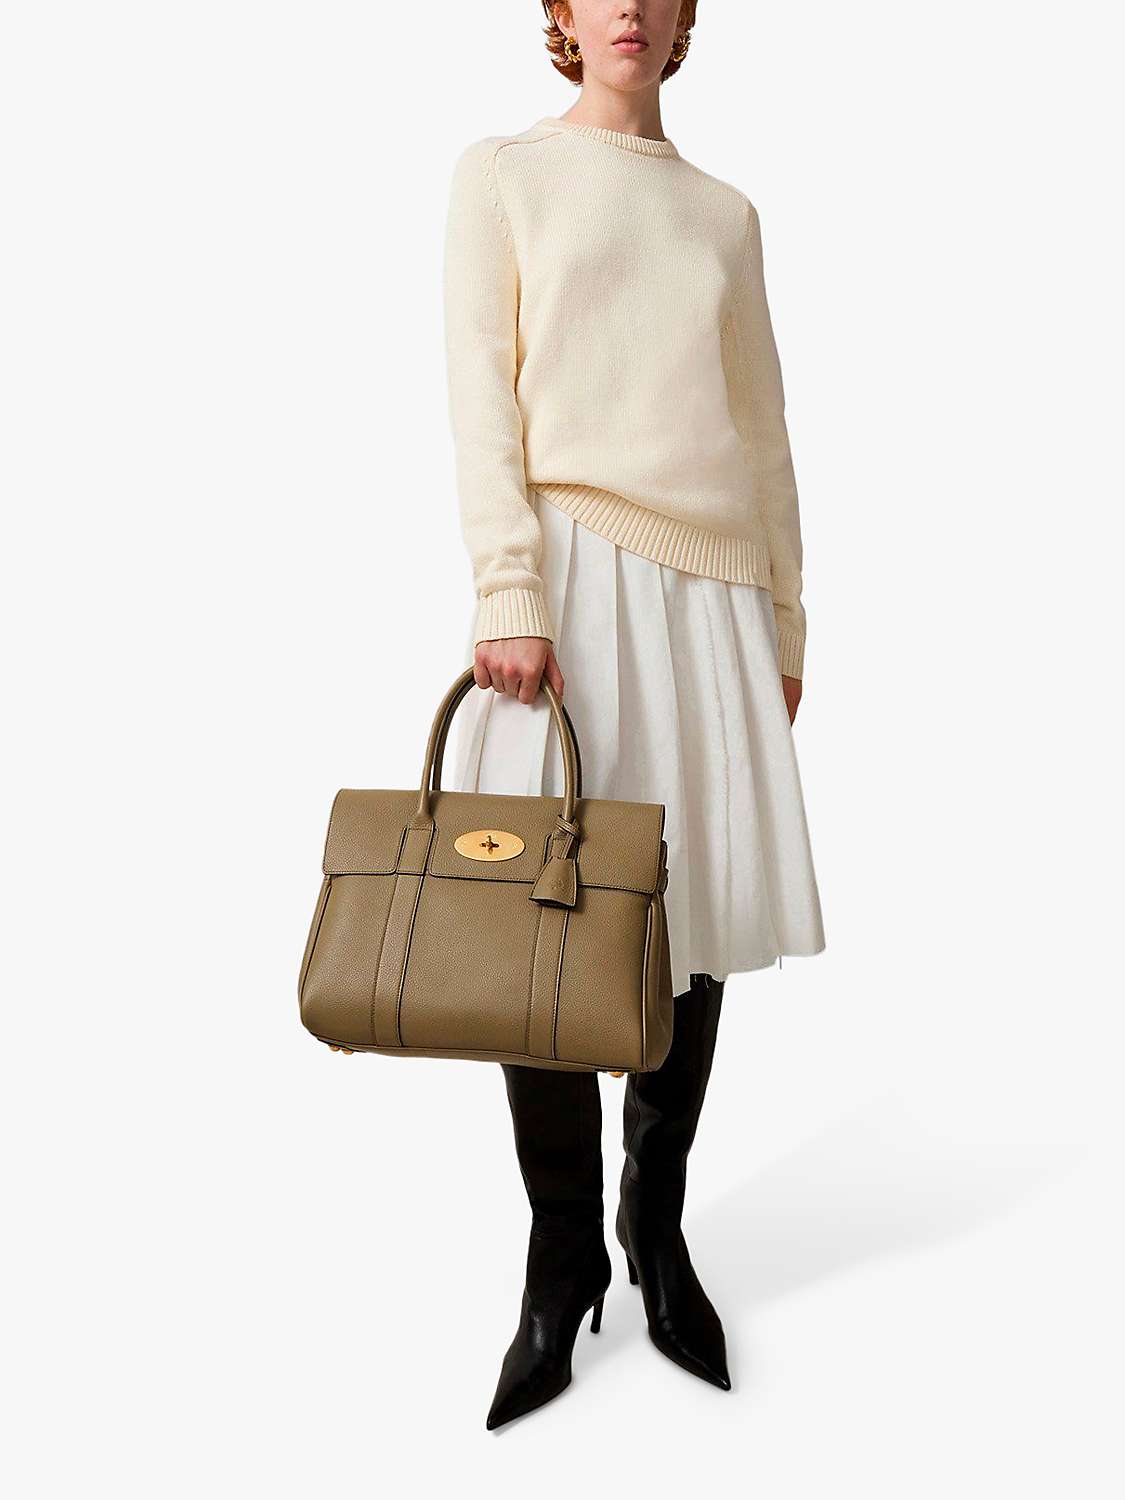 Buy Mulberry Bayswater Classic Grain Leather Handbag Online at johnlewis.com